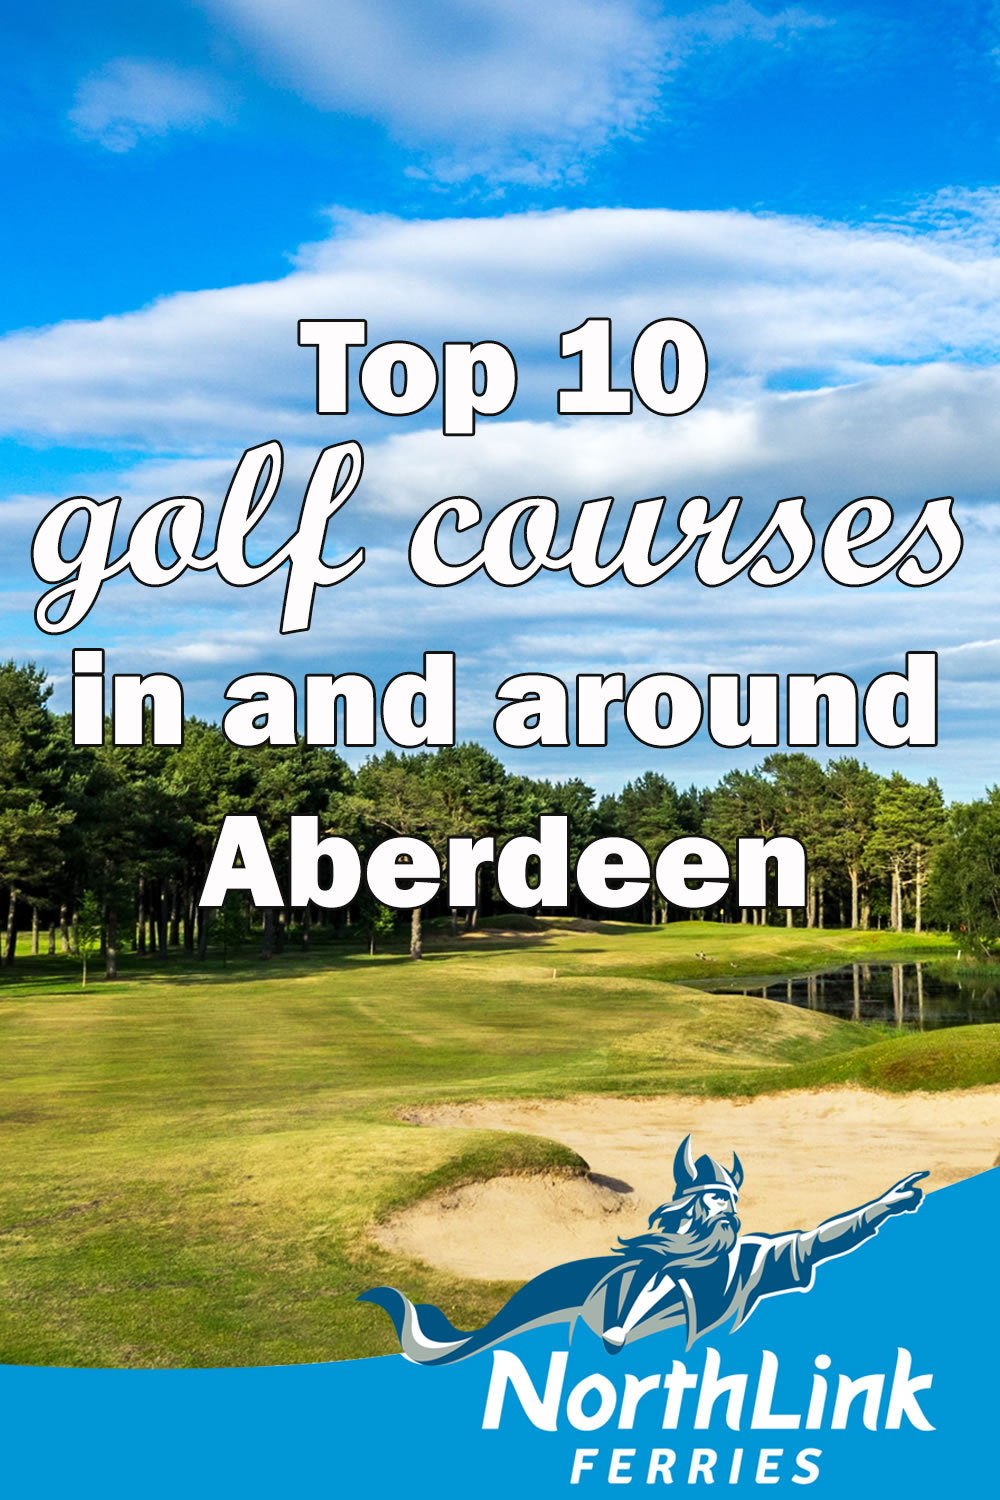 Top 10 golf courses in and around Aberdeen